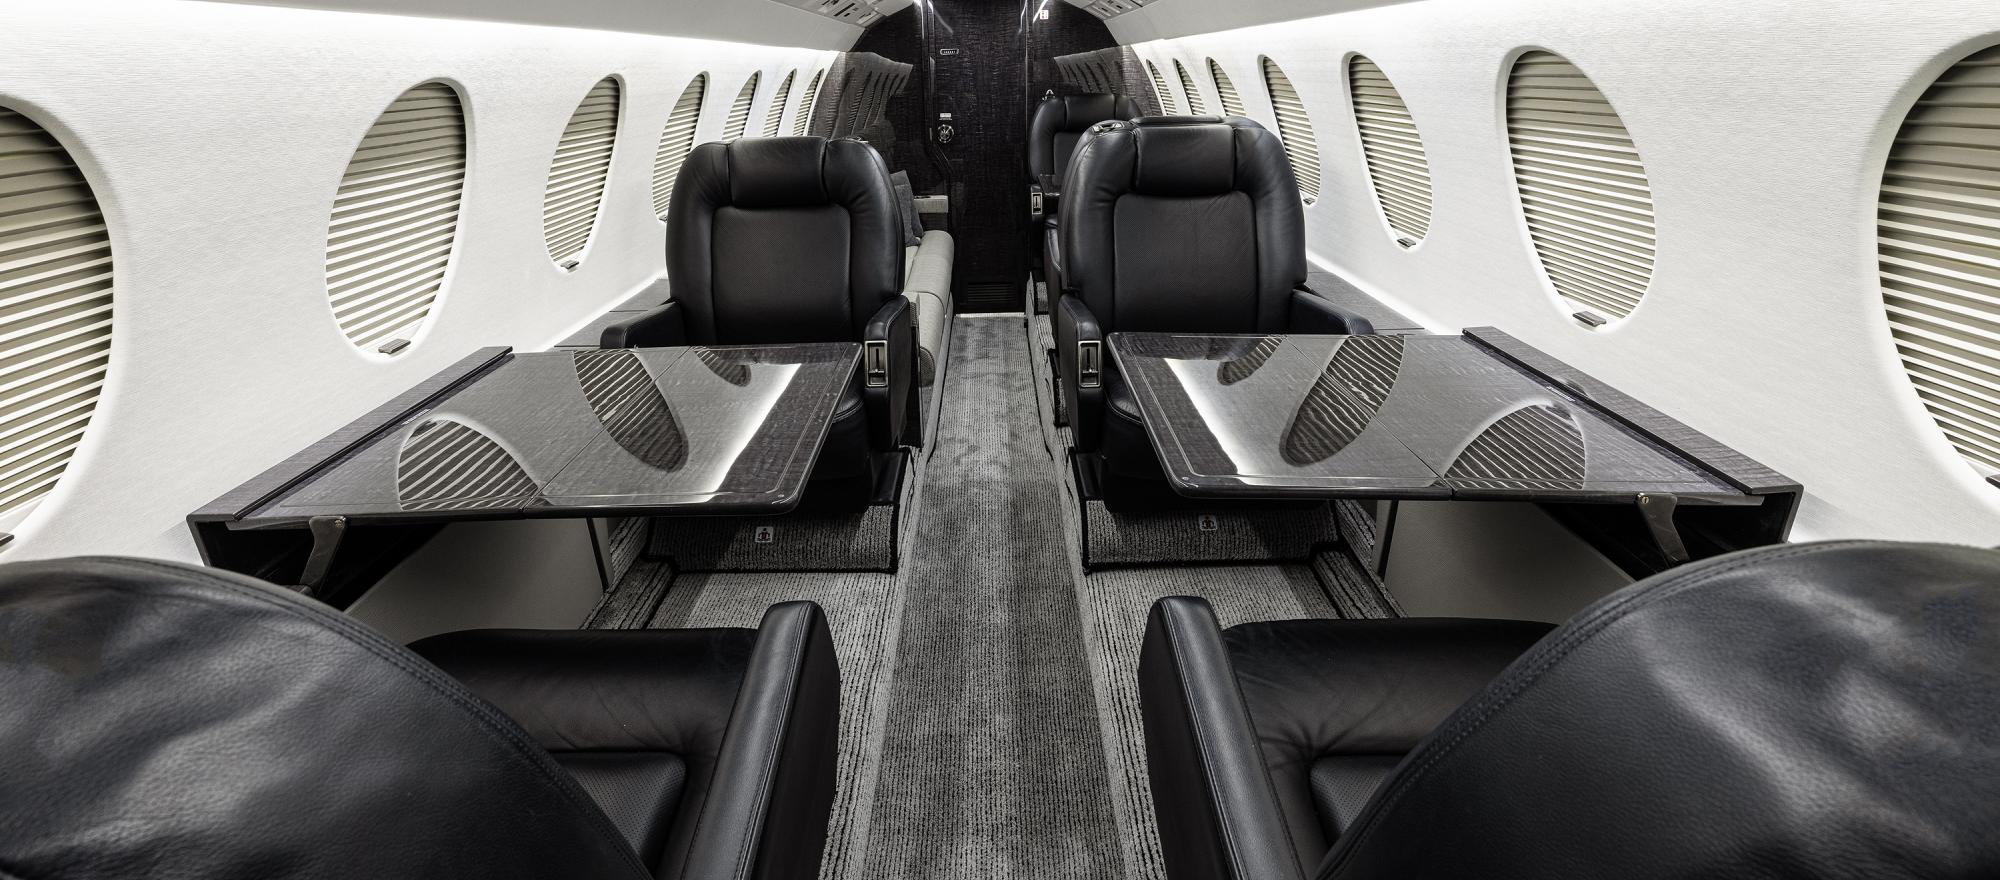 Duncan Aviation refurnished a Falcon 50 to sleek and stunning effect.